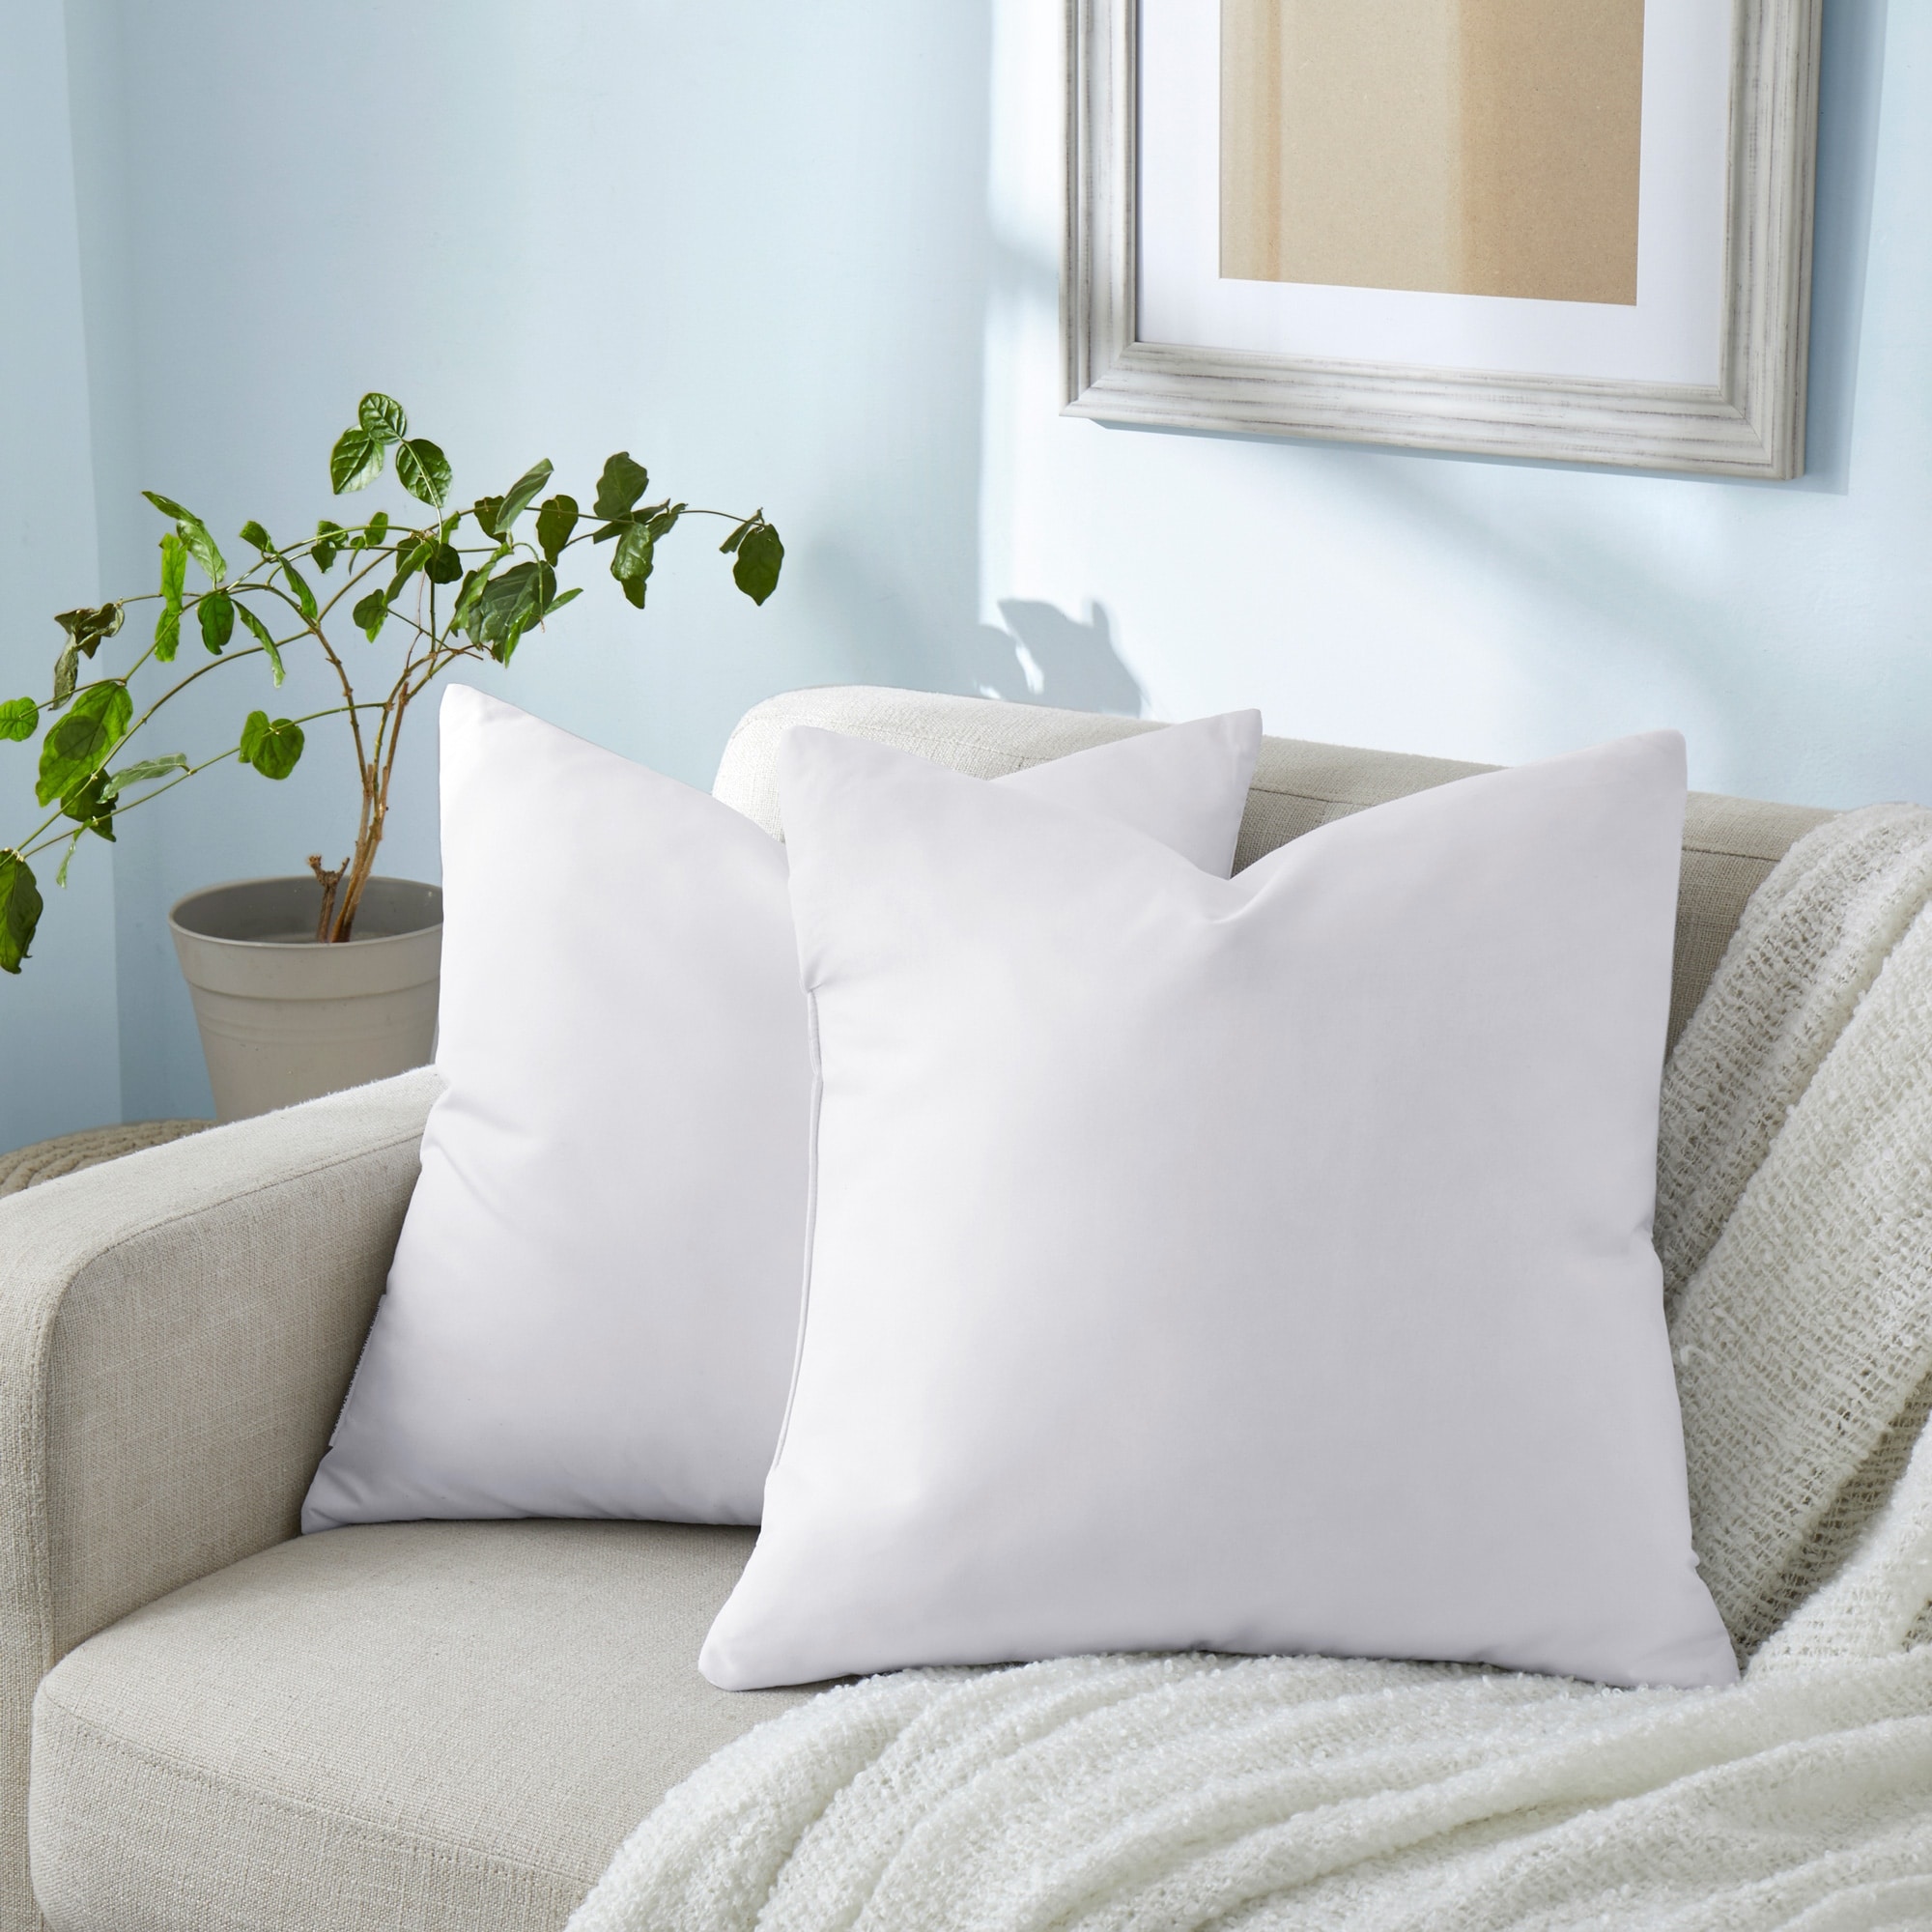 https://ak1.ostkcdn.com/images/products/is/images/direct/c826d7b9c4a738414bcbe4b6259036f609cc6c08/Feather-Down-Pillow-Inserts-Decorative-Throw-Pillows.jpg